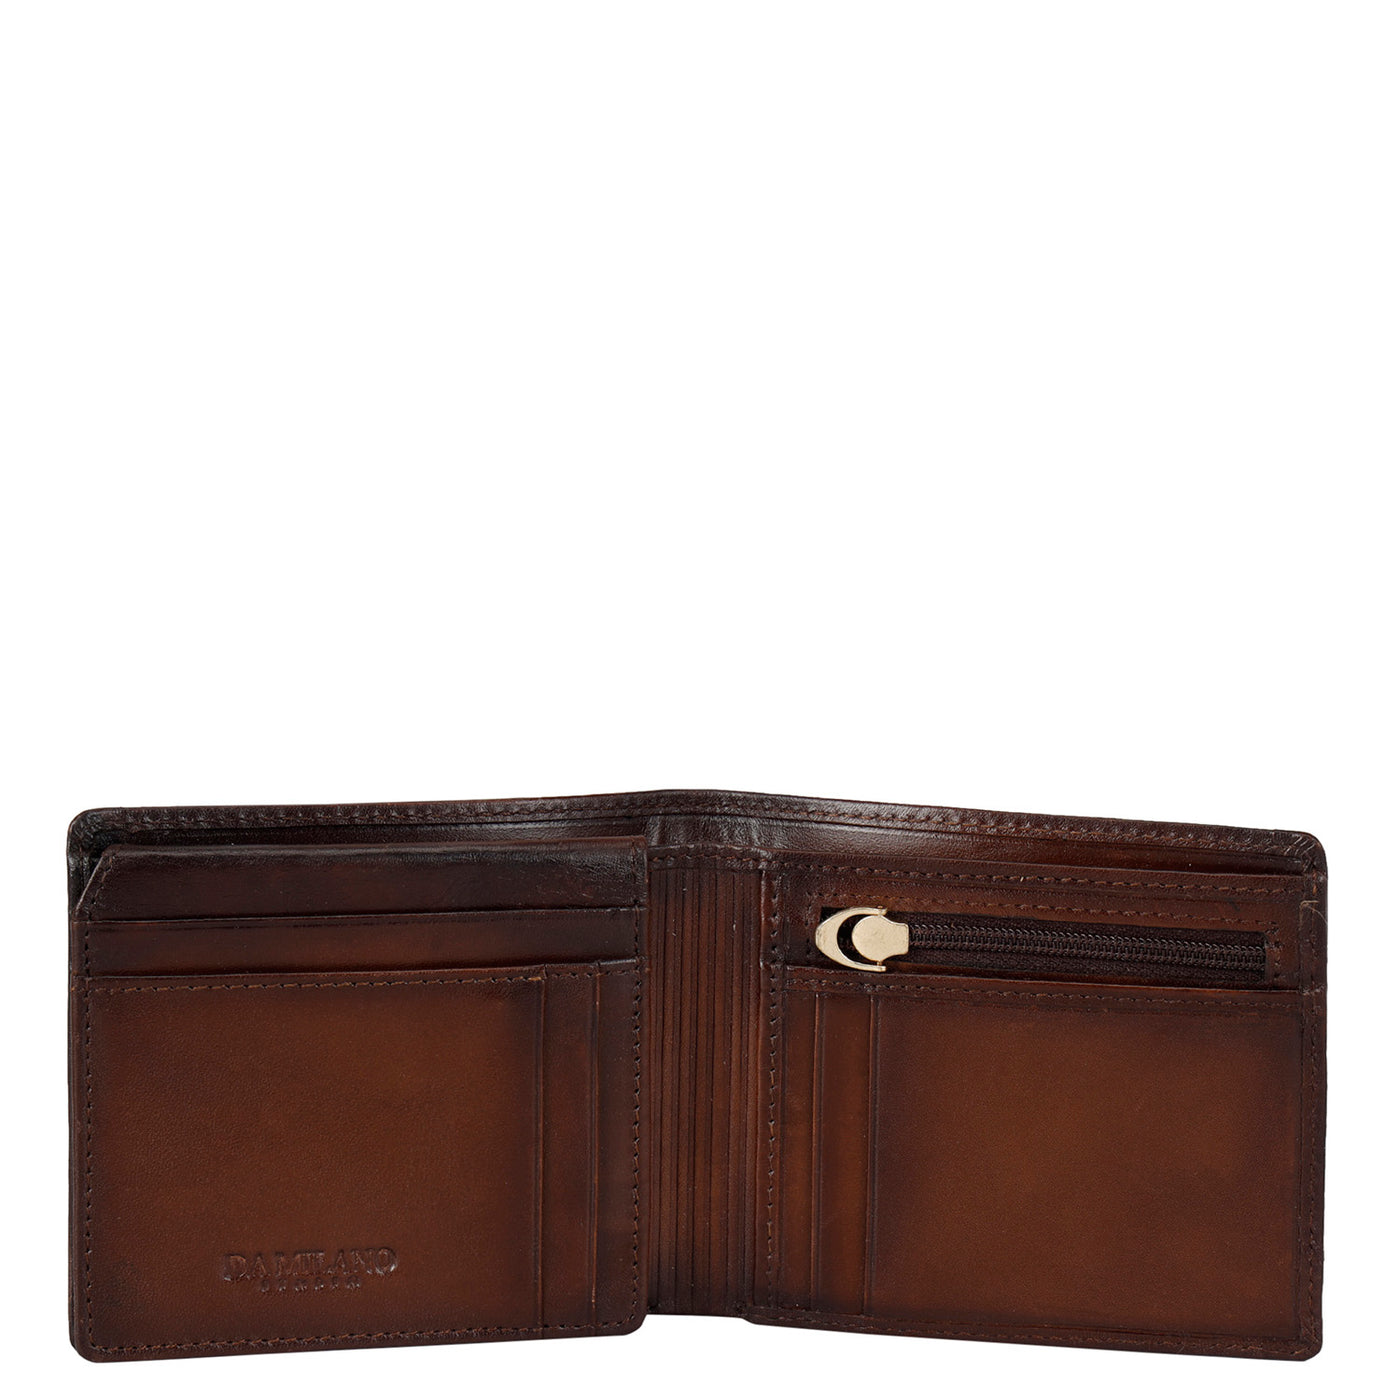 Fish Leather Mens Wallet - Brown